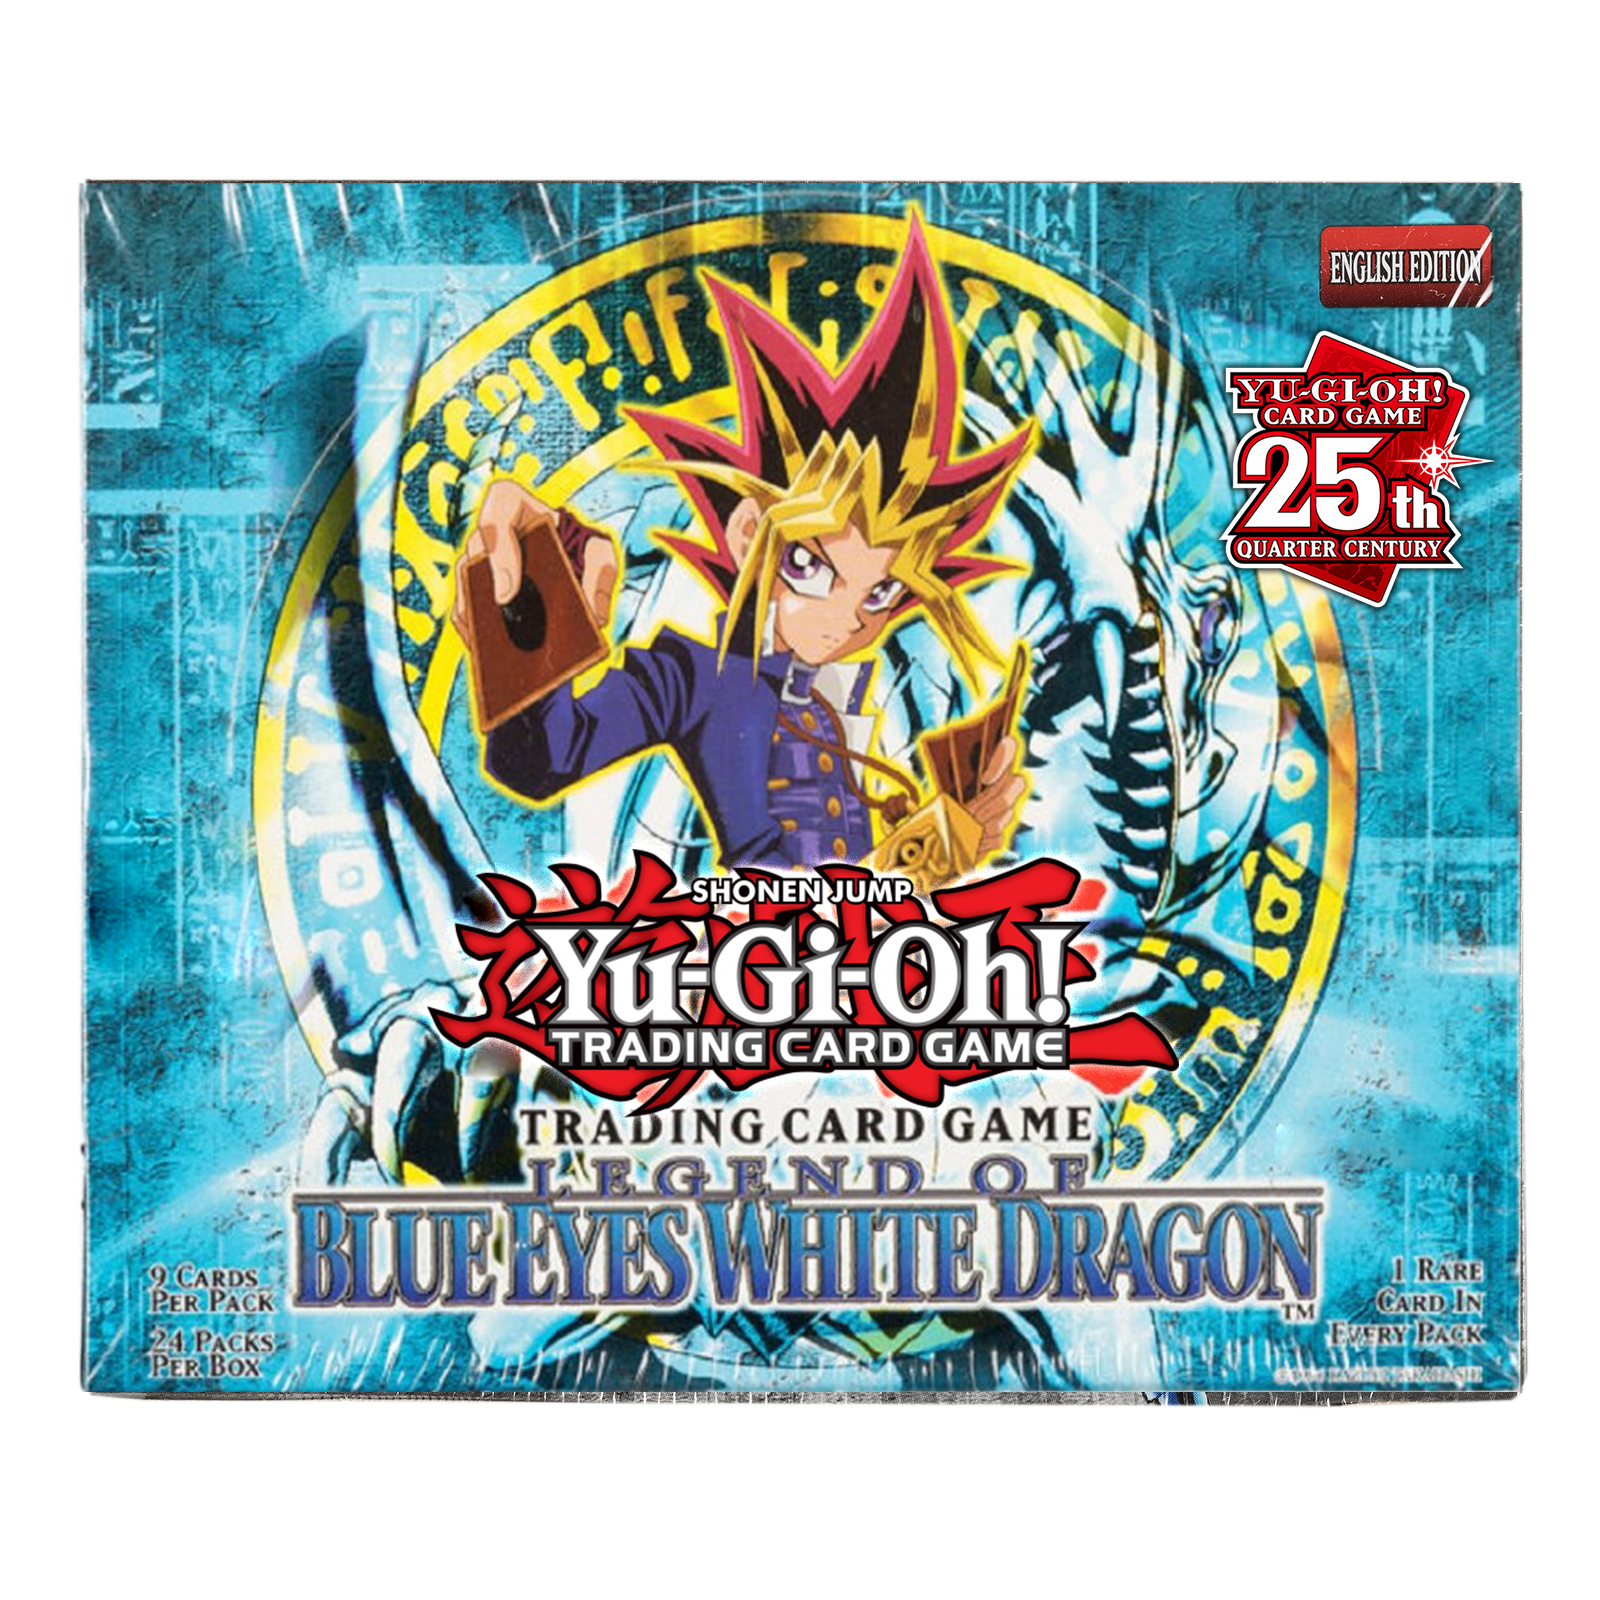 * Legend of Blue Eyes White Dragon Booster Box 25th Anniversary Edition